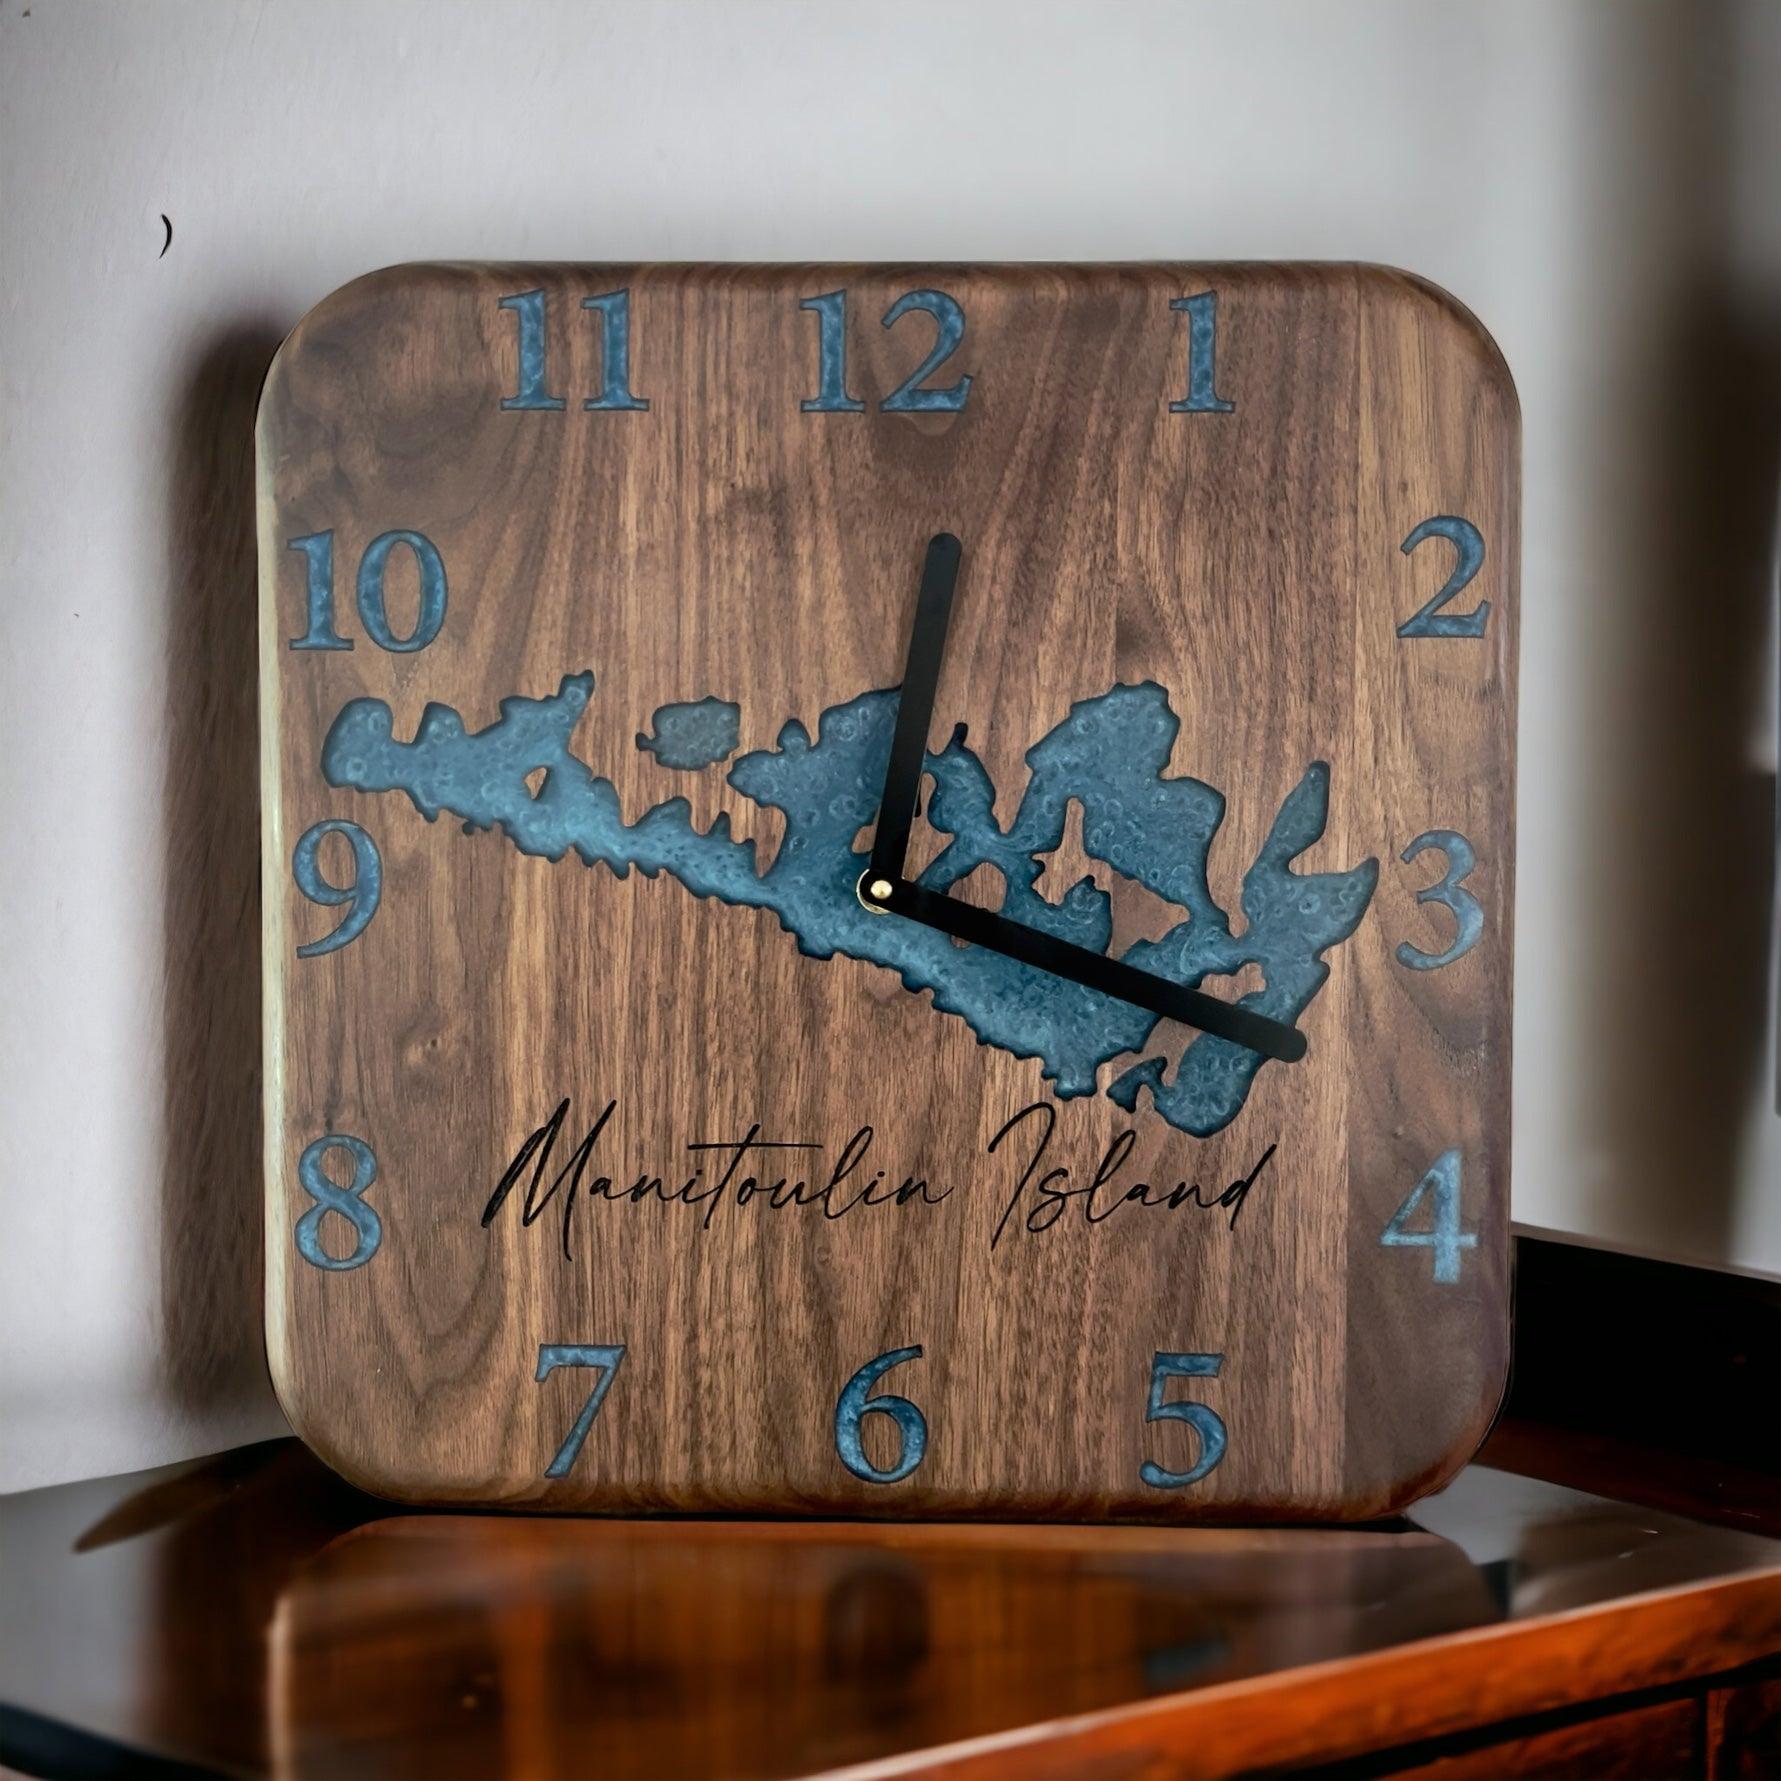 Manitoulin clock - We have the wood